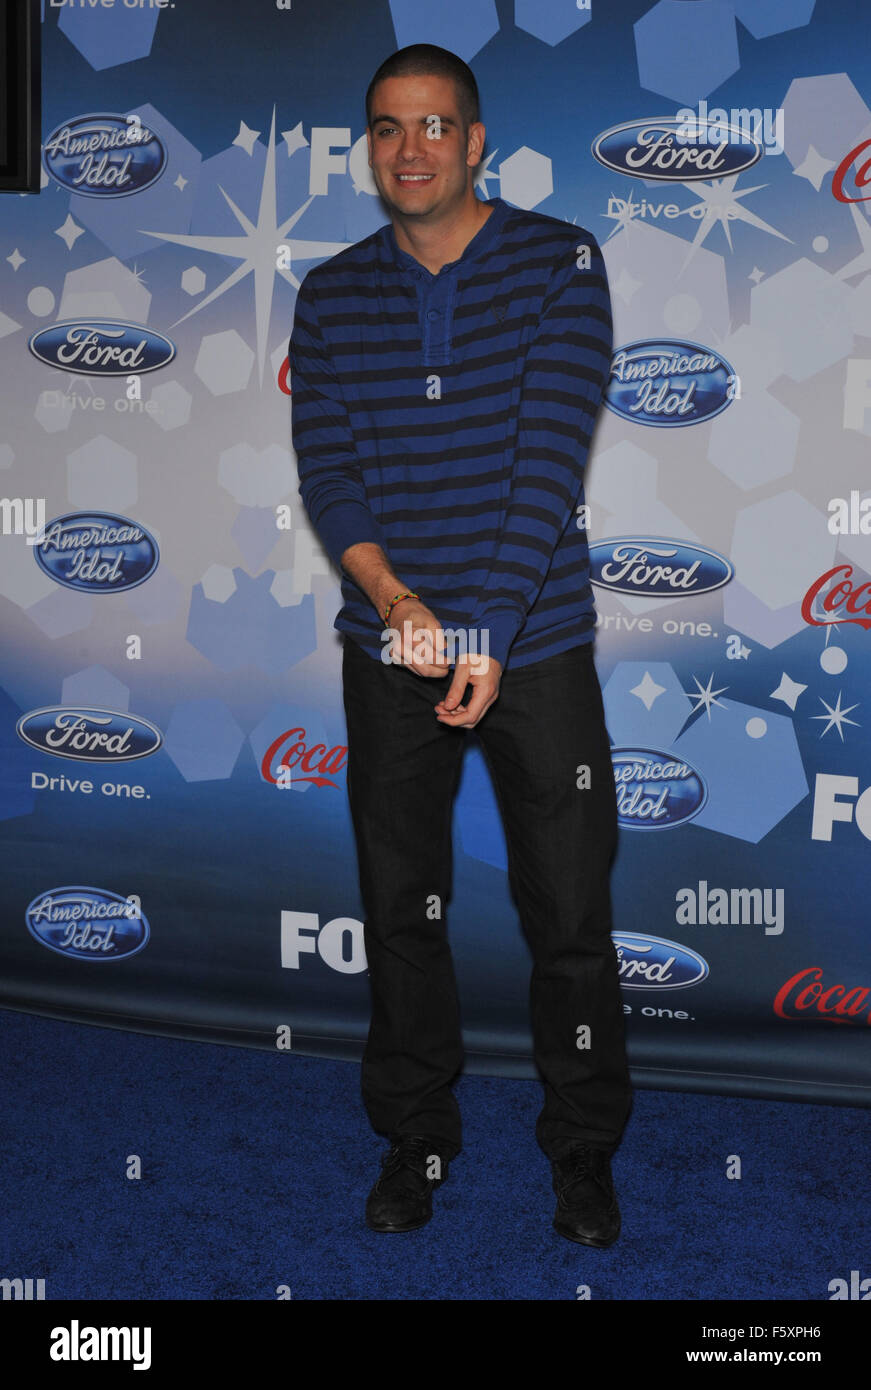 LOS ANGELES, CA - MARCH 11, 2010: Mark Salling at the party for the American Idol Final 12 at Industry, Los Angeles. Stock Photo